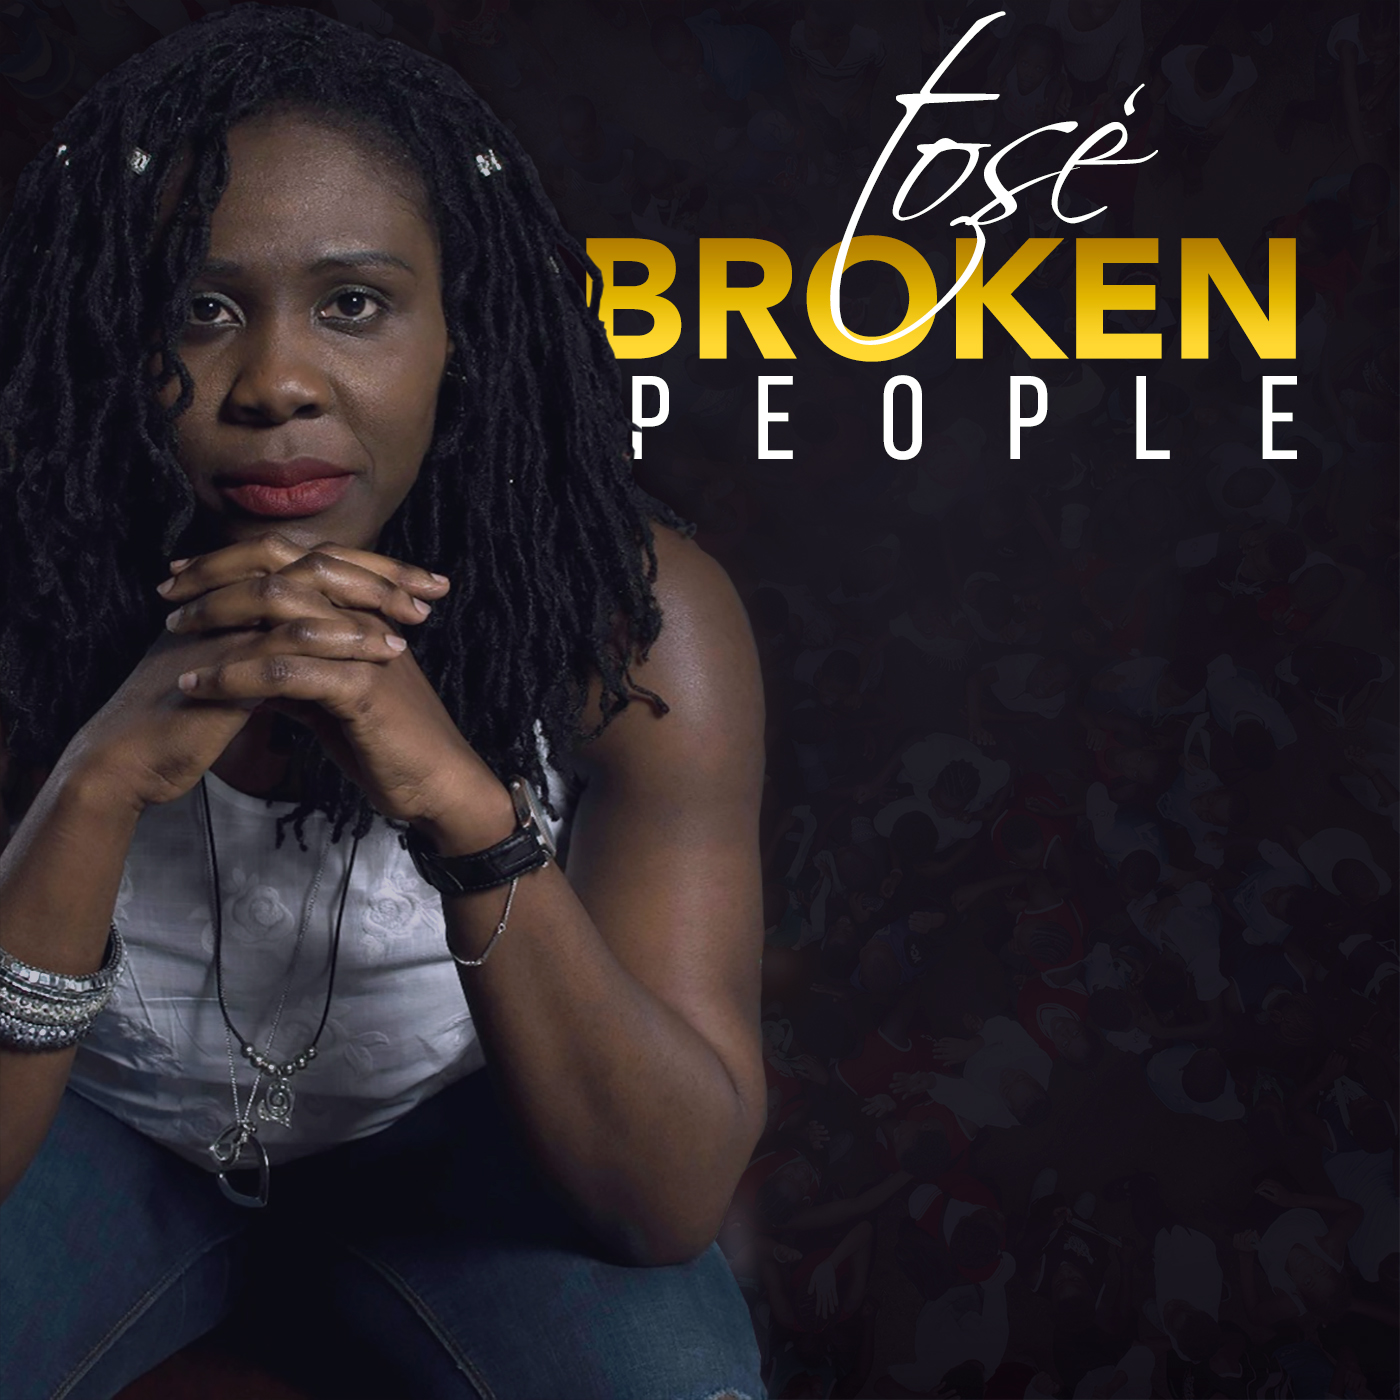 After a 2 Year Hiatus, U.K Singer Tose Has Come Back with New Single ‘Broken People’